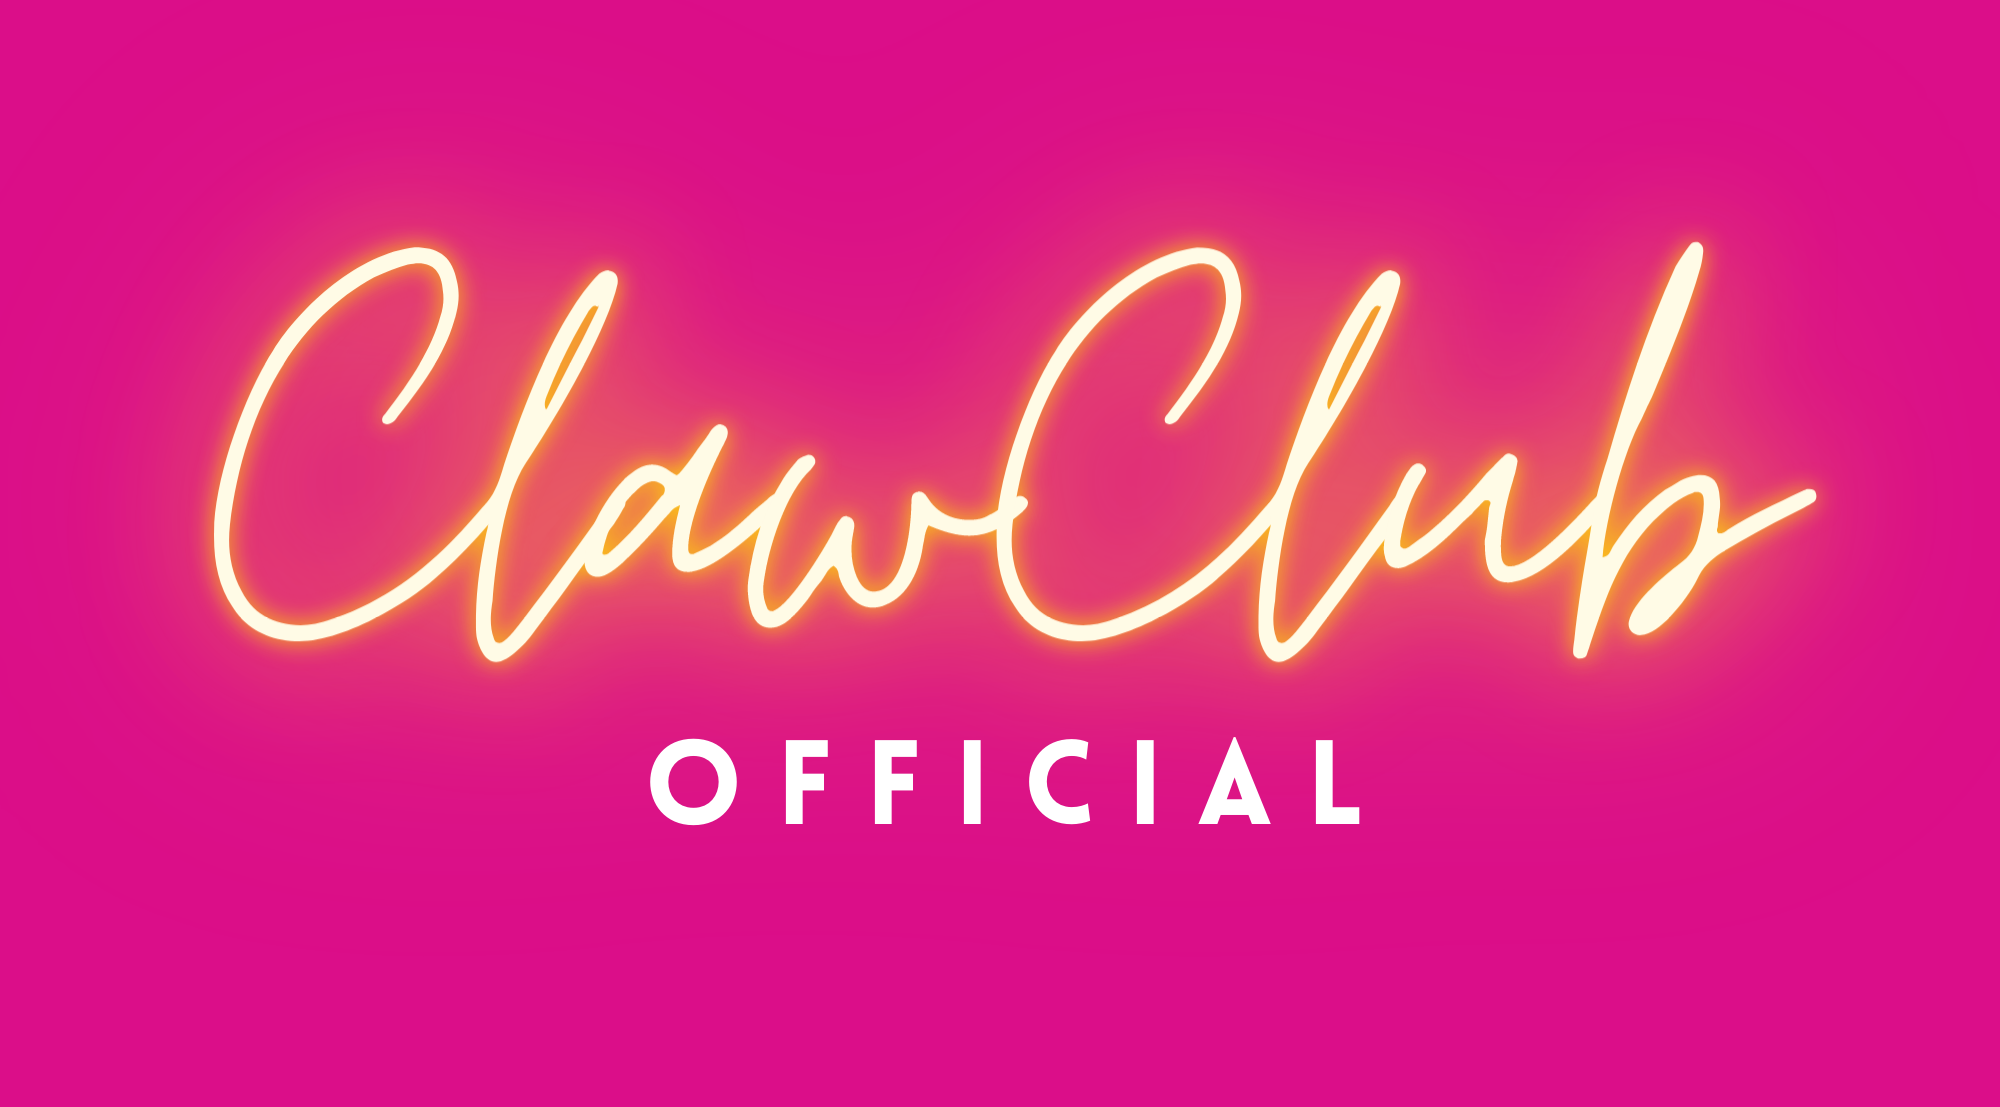 clawclub-official